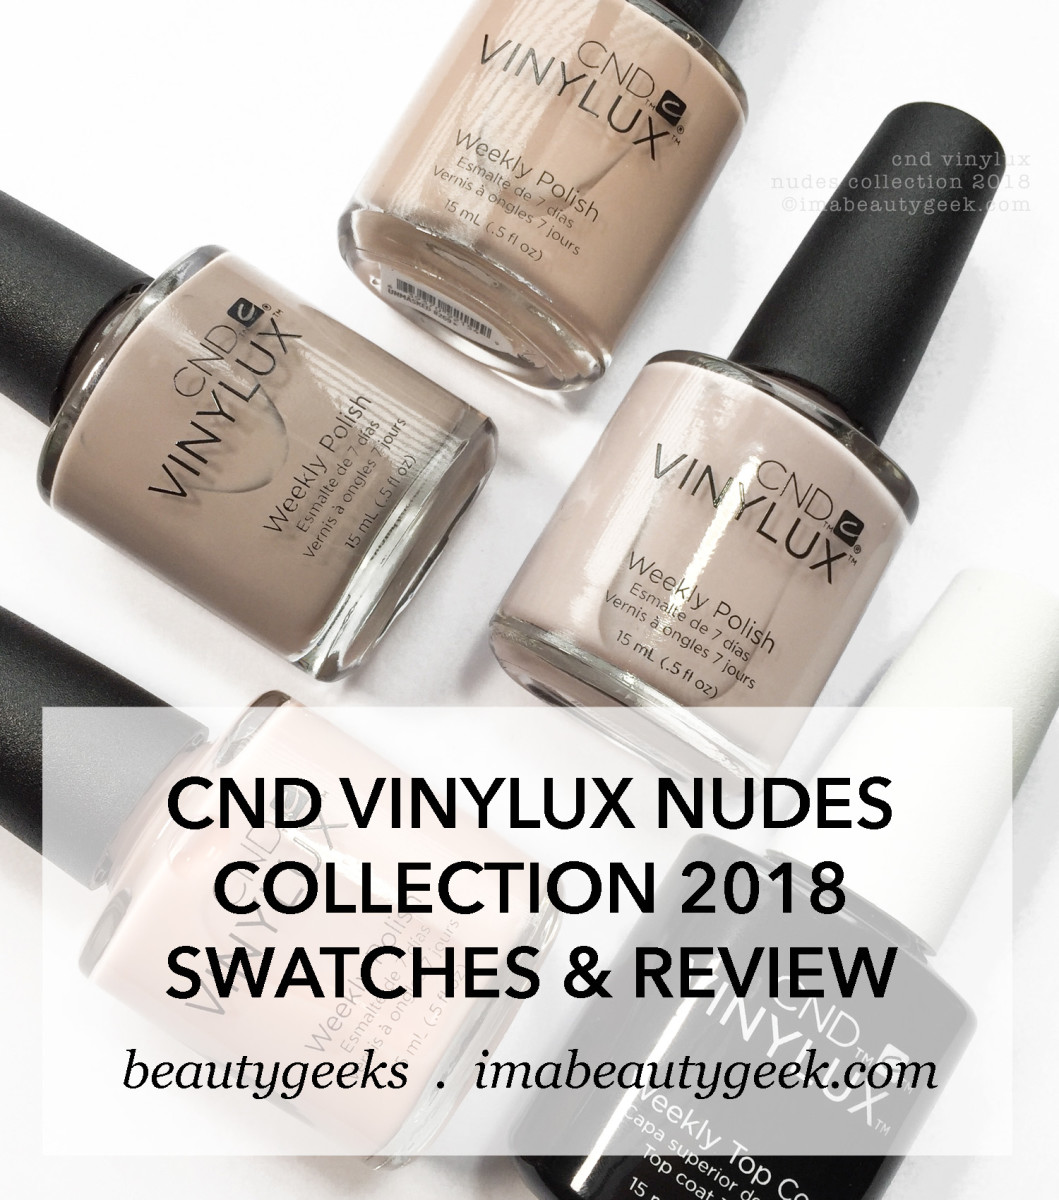 CND Vinylux Nudes Collection 2018 Swatches & Review-Manigeek-BEAUTYGEEKS